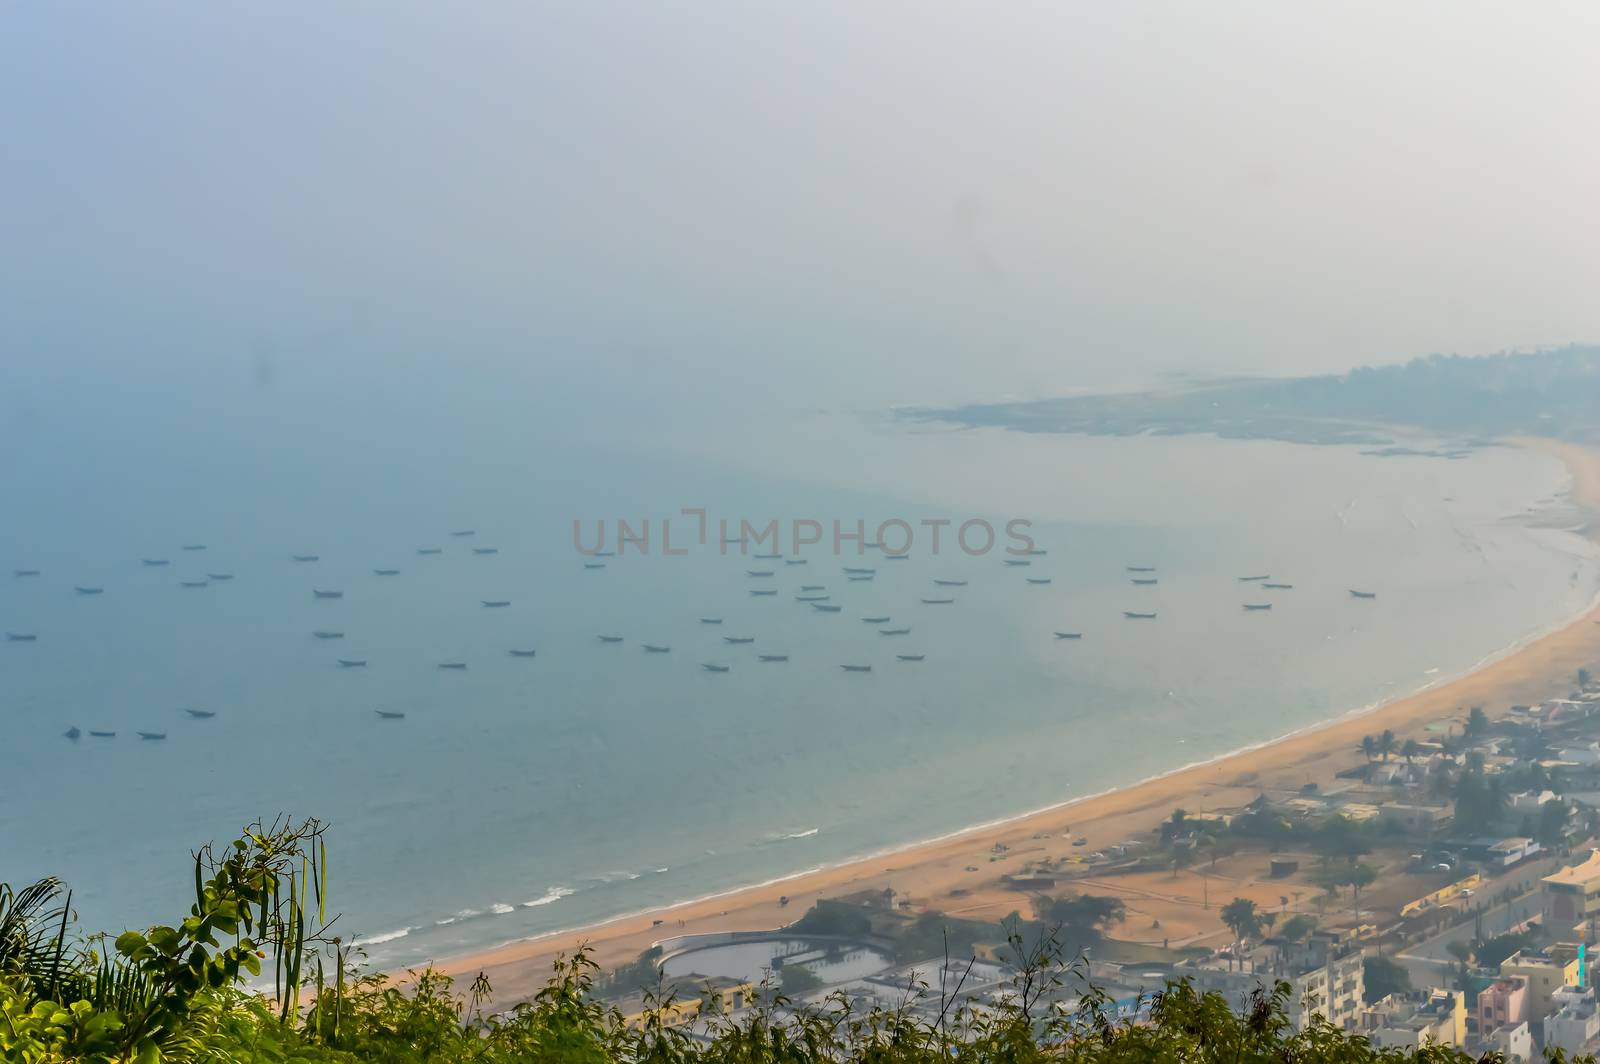 Photograph of Goa sea beach taken from top of a mountain during Christmas Holiday or New Year celebration time by sudiptabhowmick